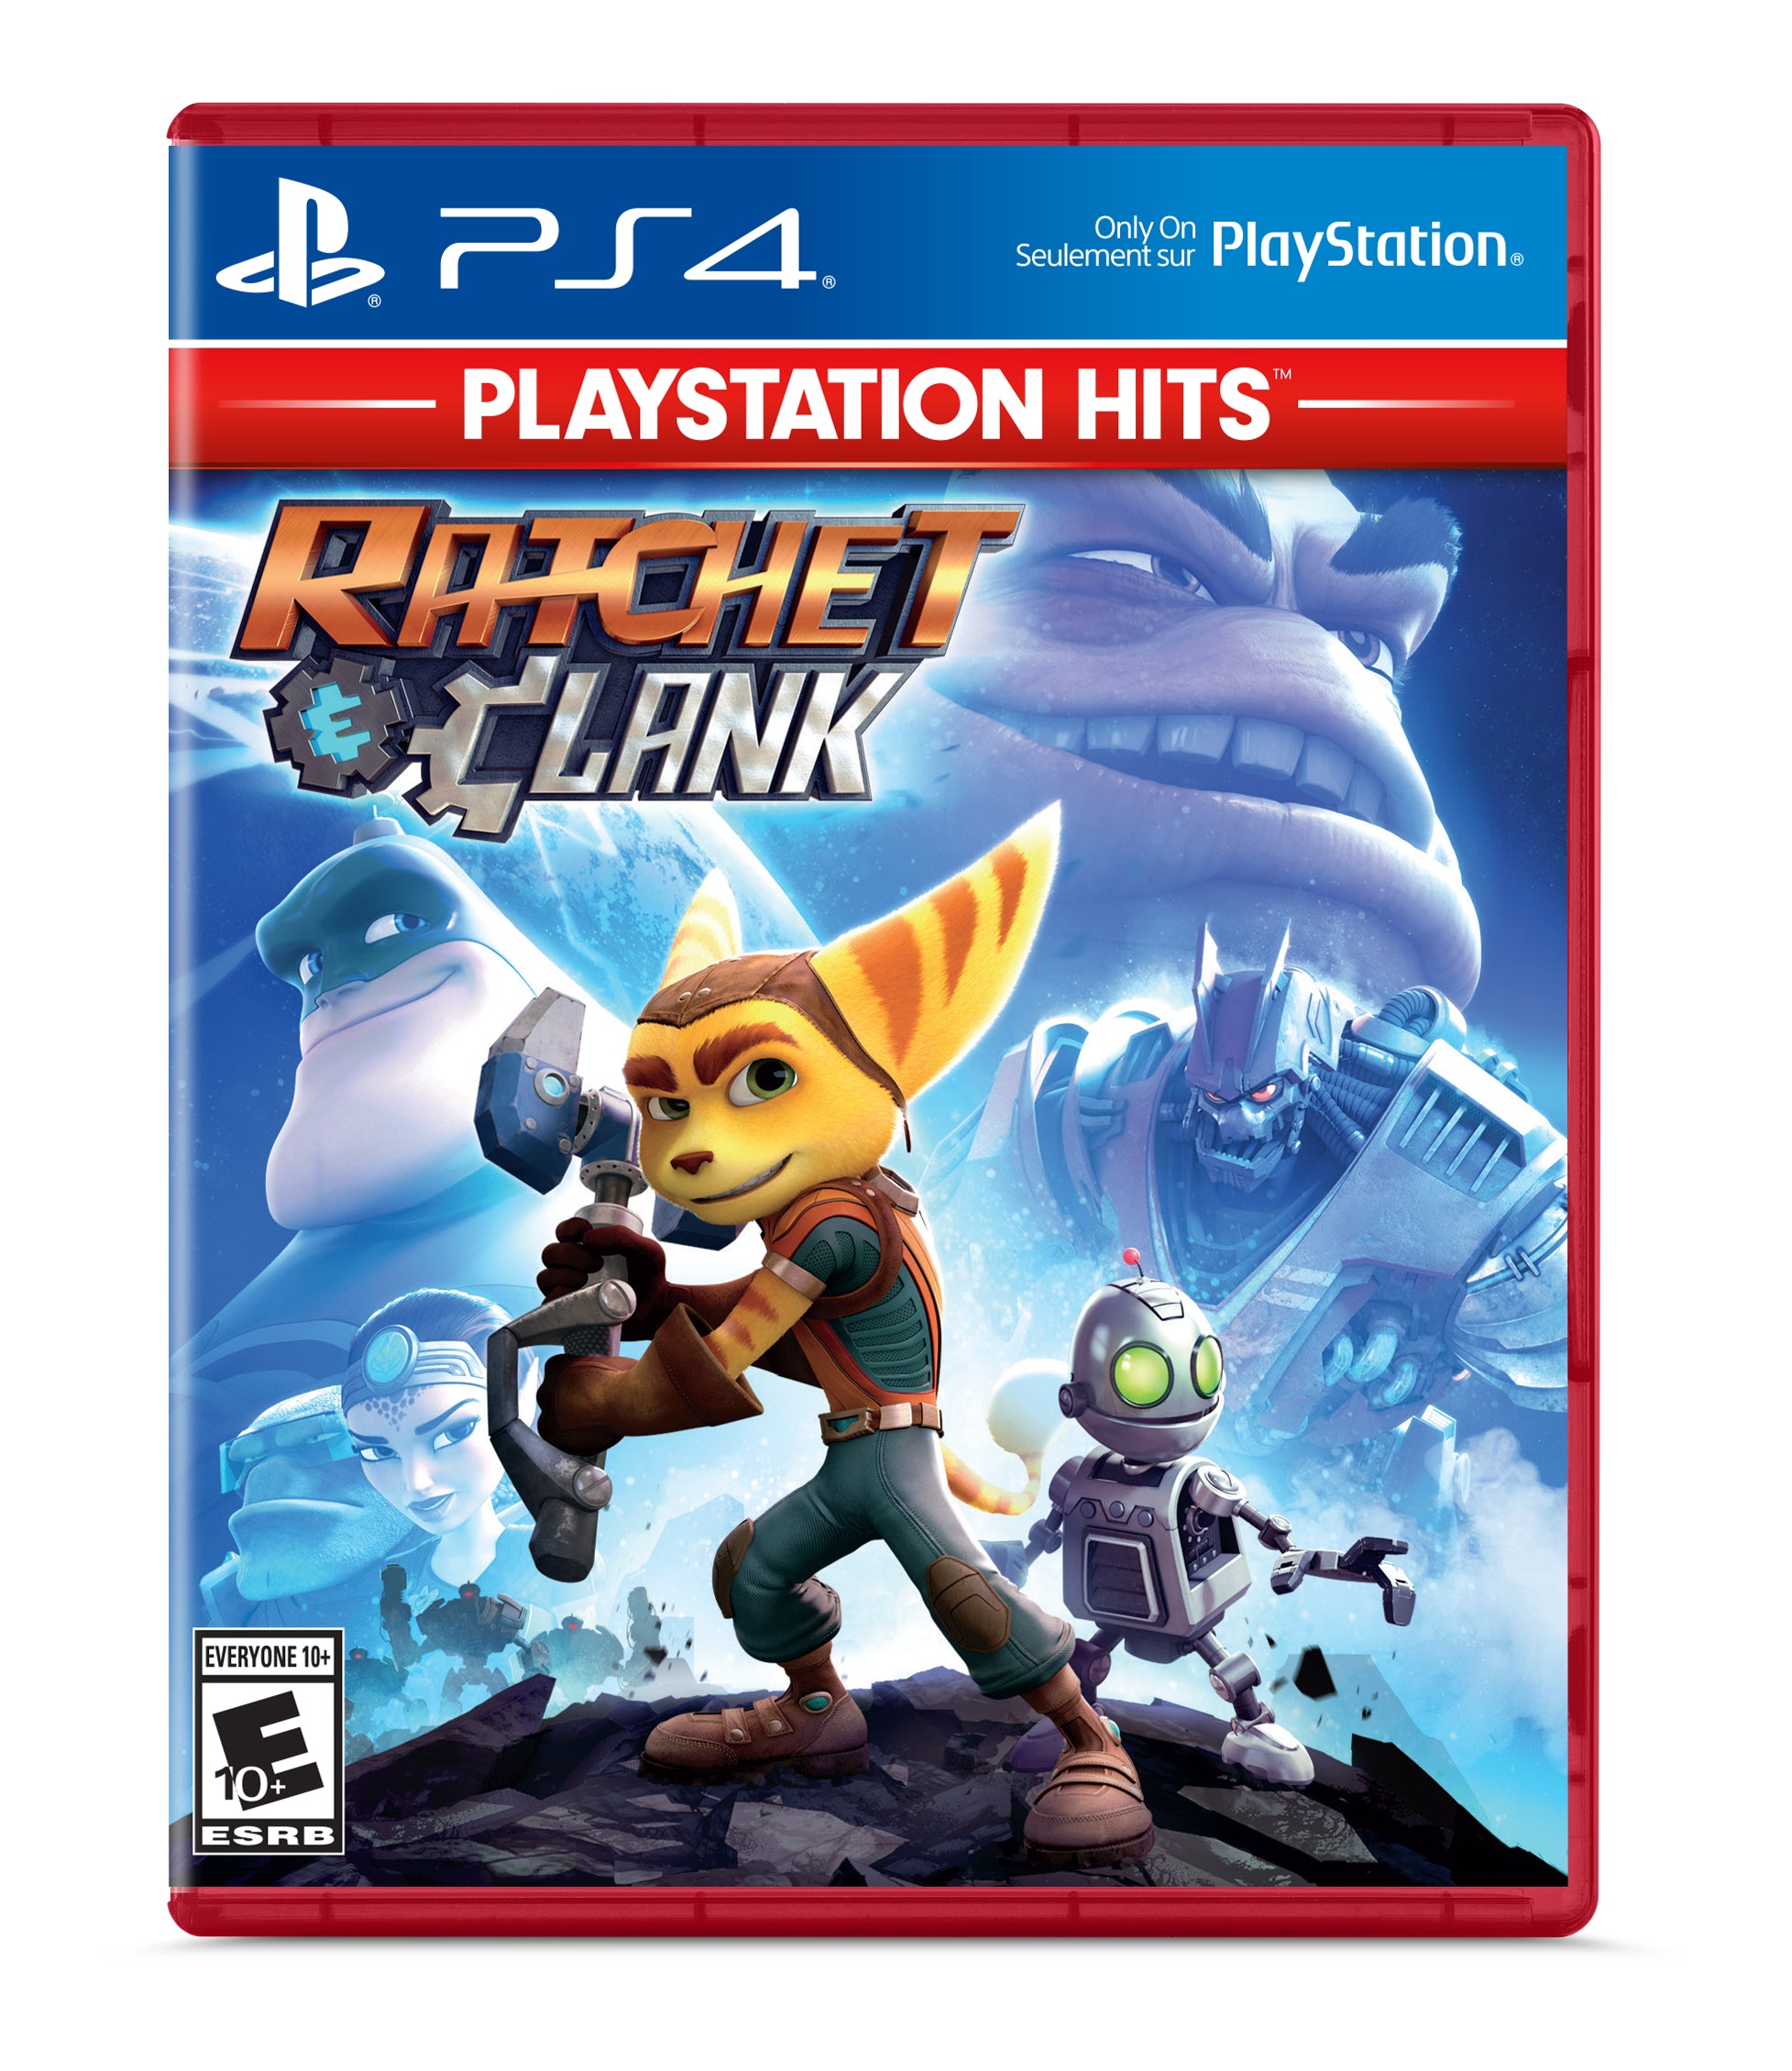 Sony PlayStation 4 Slim Ratchet & Clank Bundle Upgrade 1TB SSD PS4 Gaming Console, Jet Black, with Mytrix High Speed HDMI - Internal Fast Solid State Drive Enhanced PS4 Console